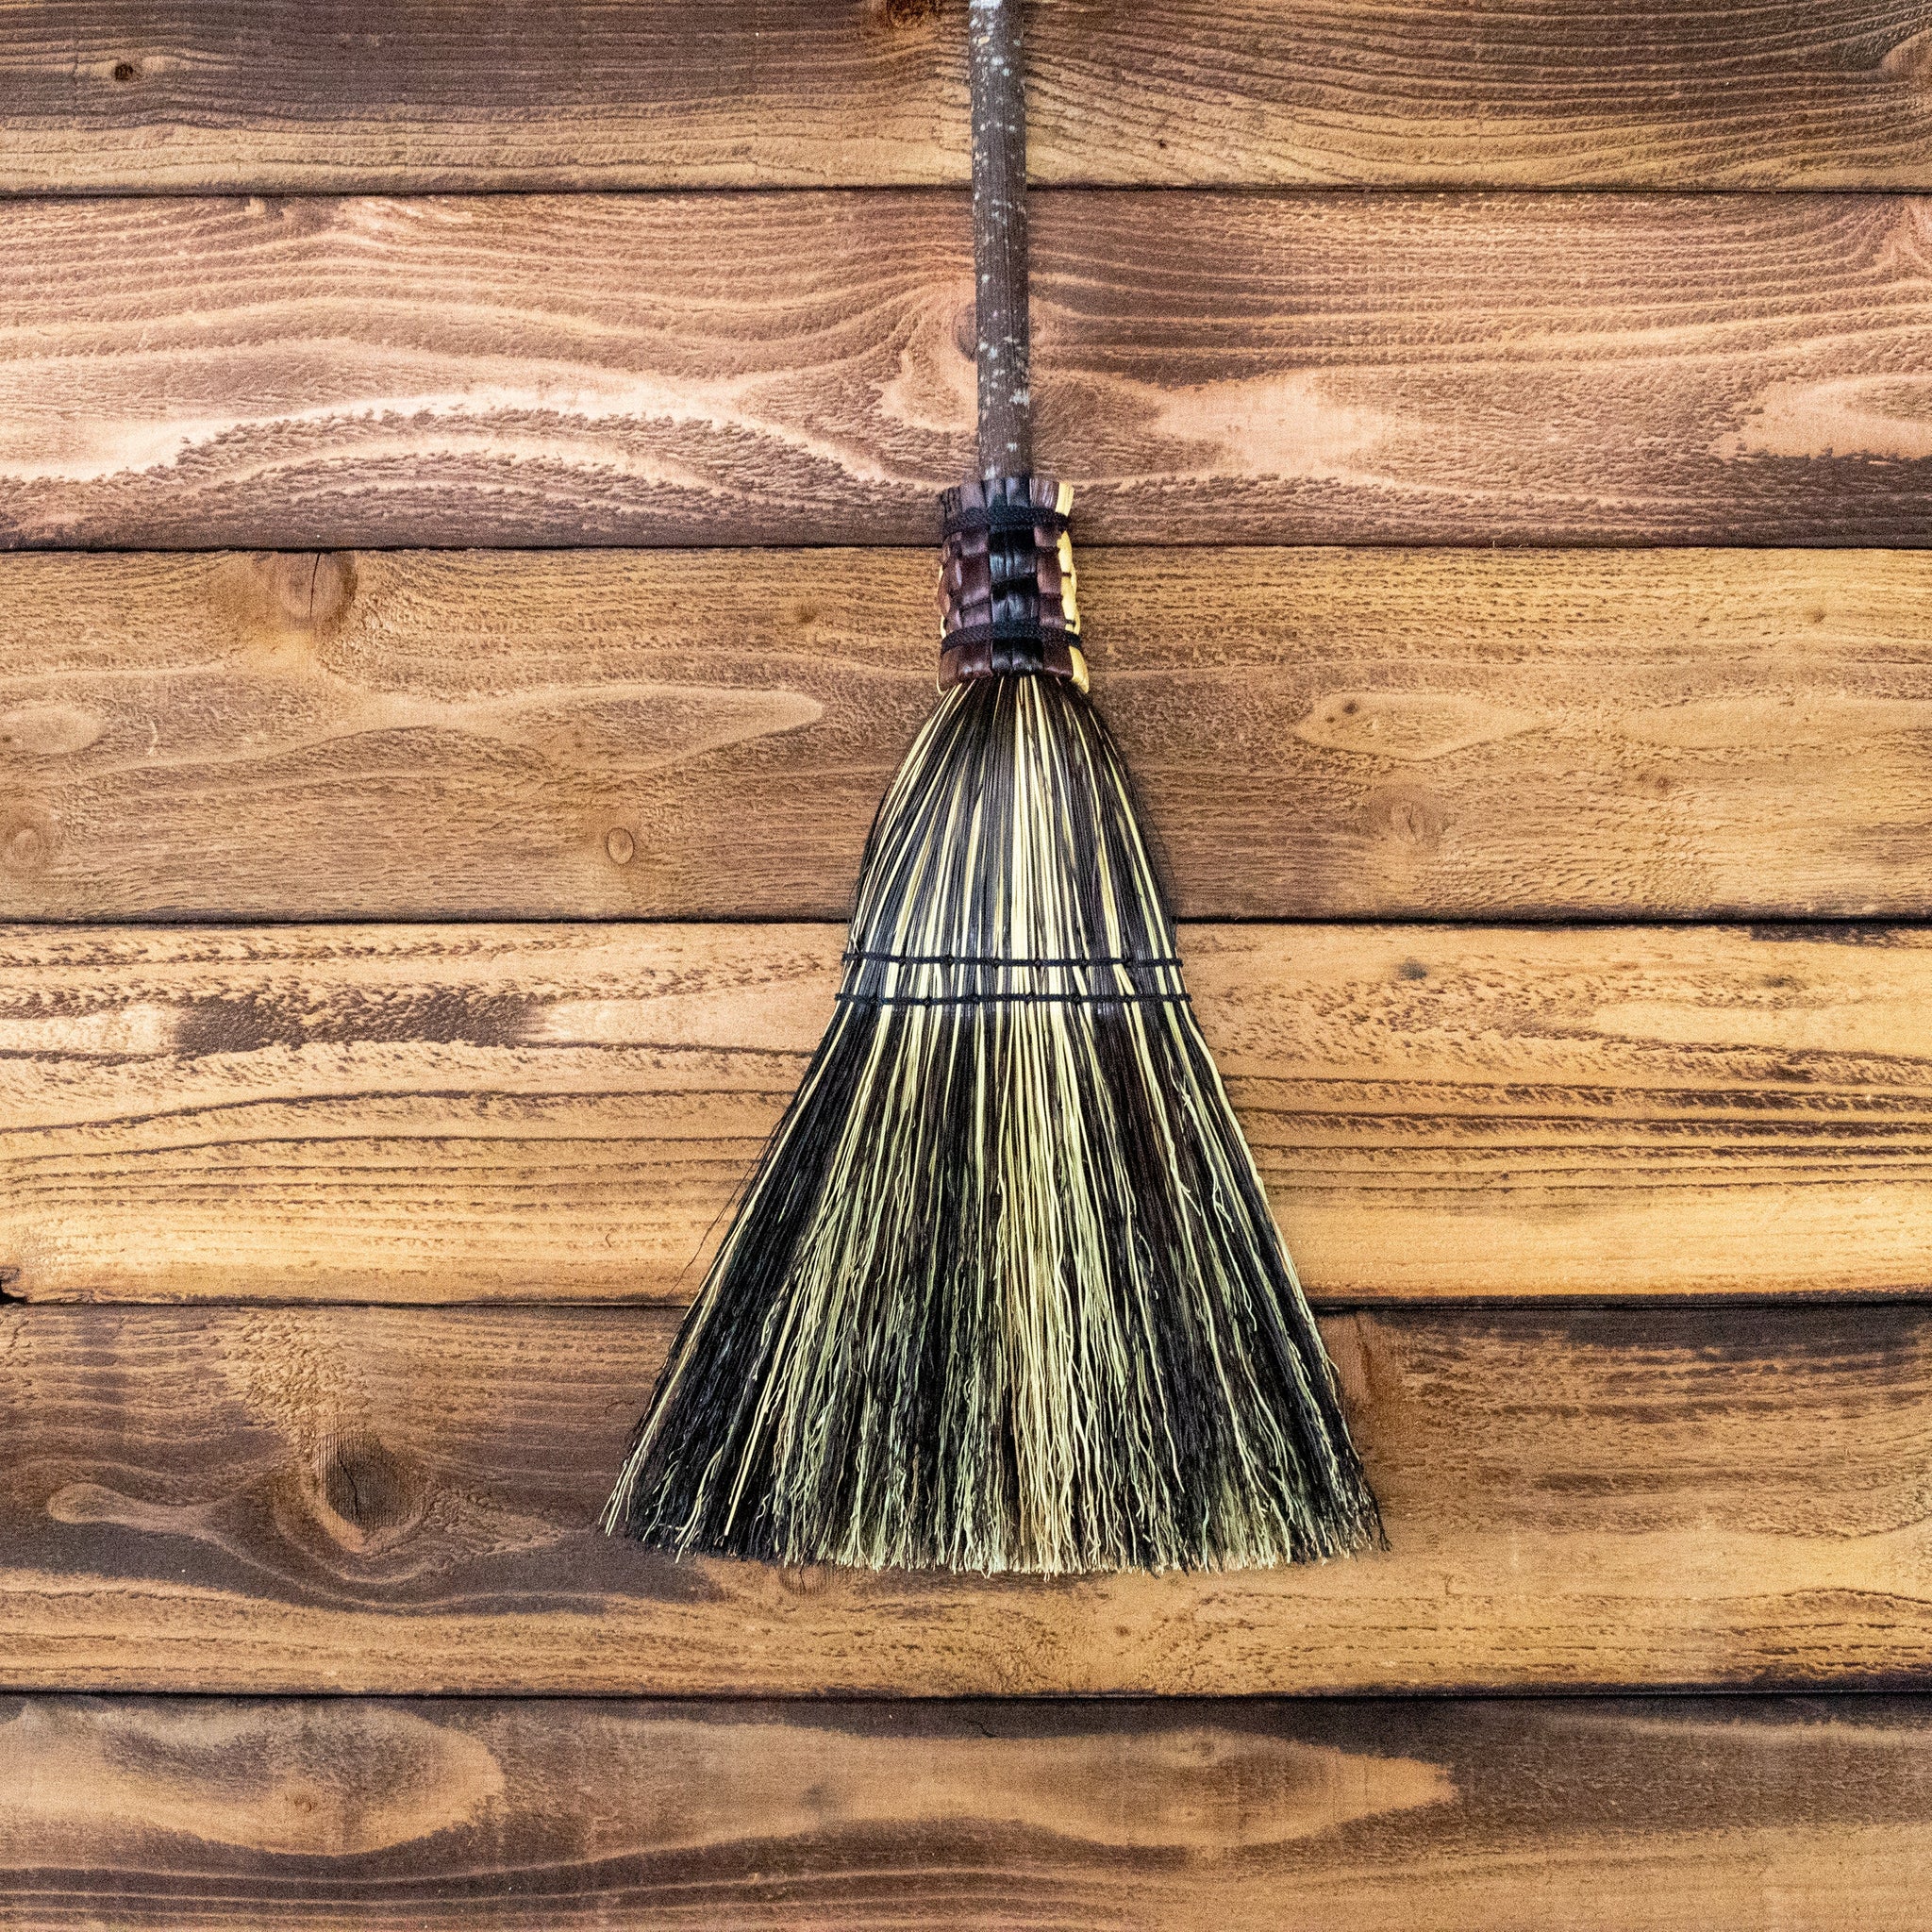 Kids Broom - Brown Mixed - Small - Childrens House Broom, Tent Broom, Functional Art, Rustic Wall Decor, Broomstick